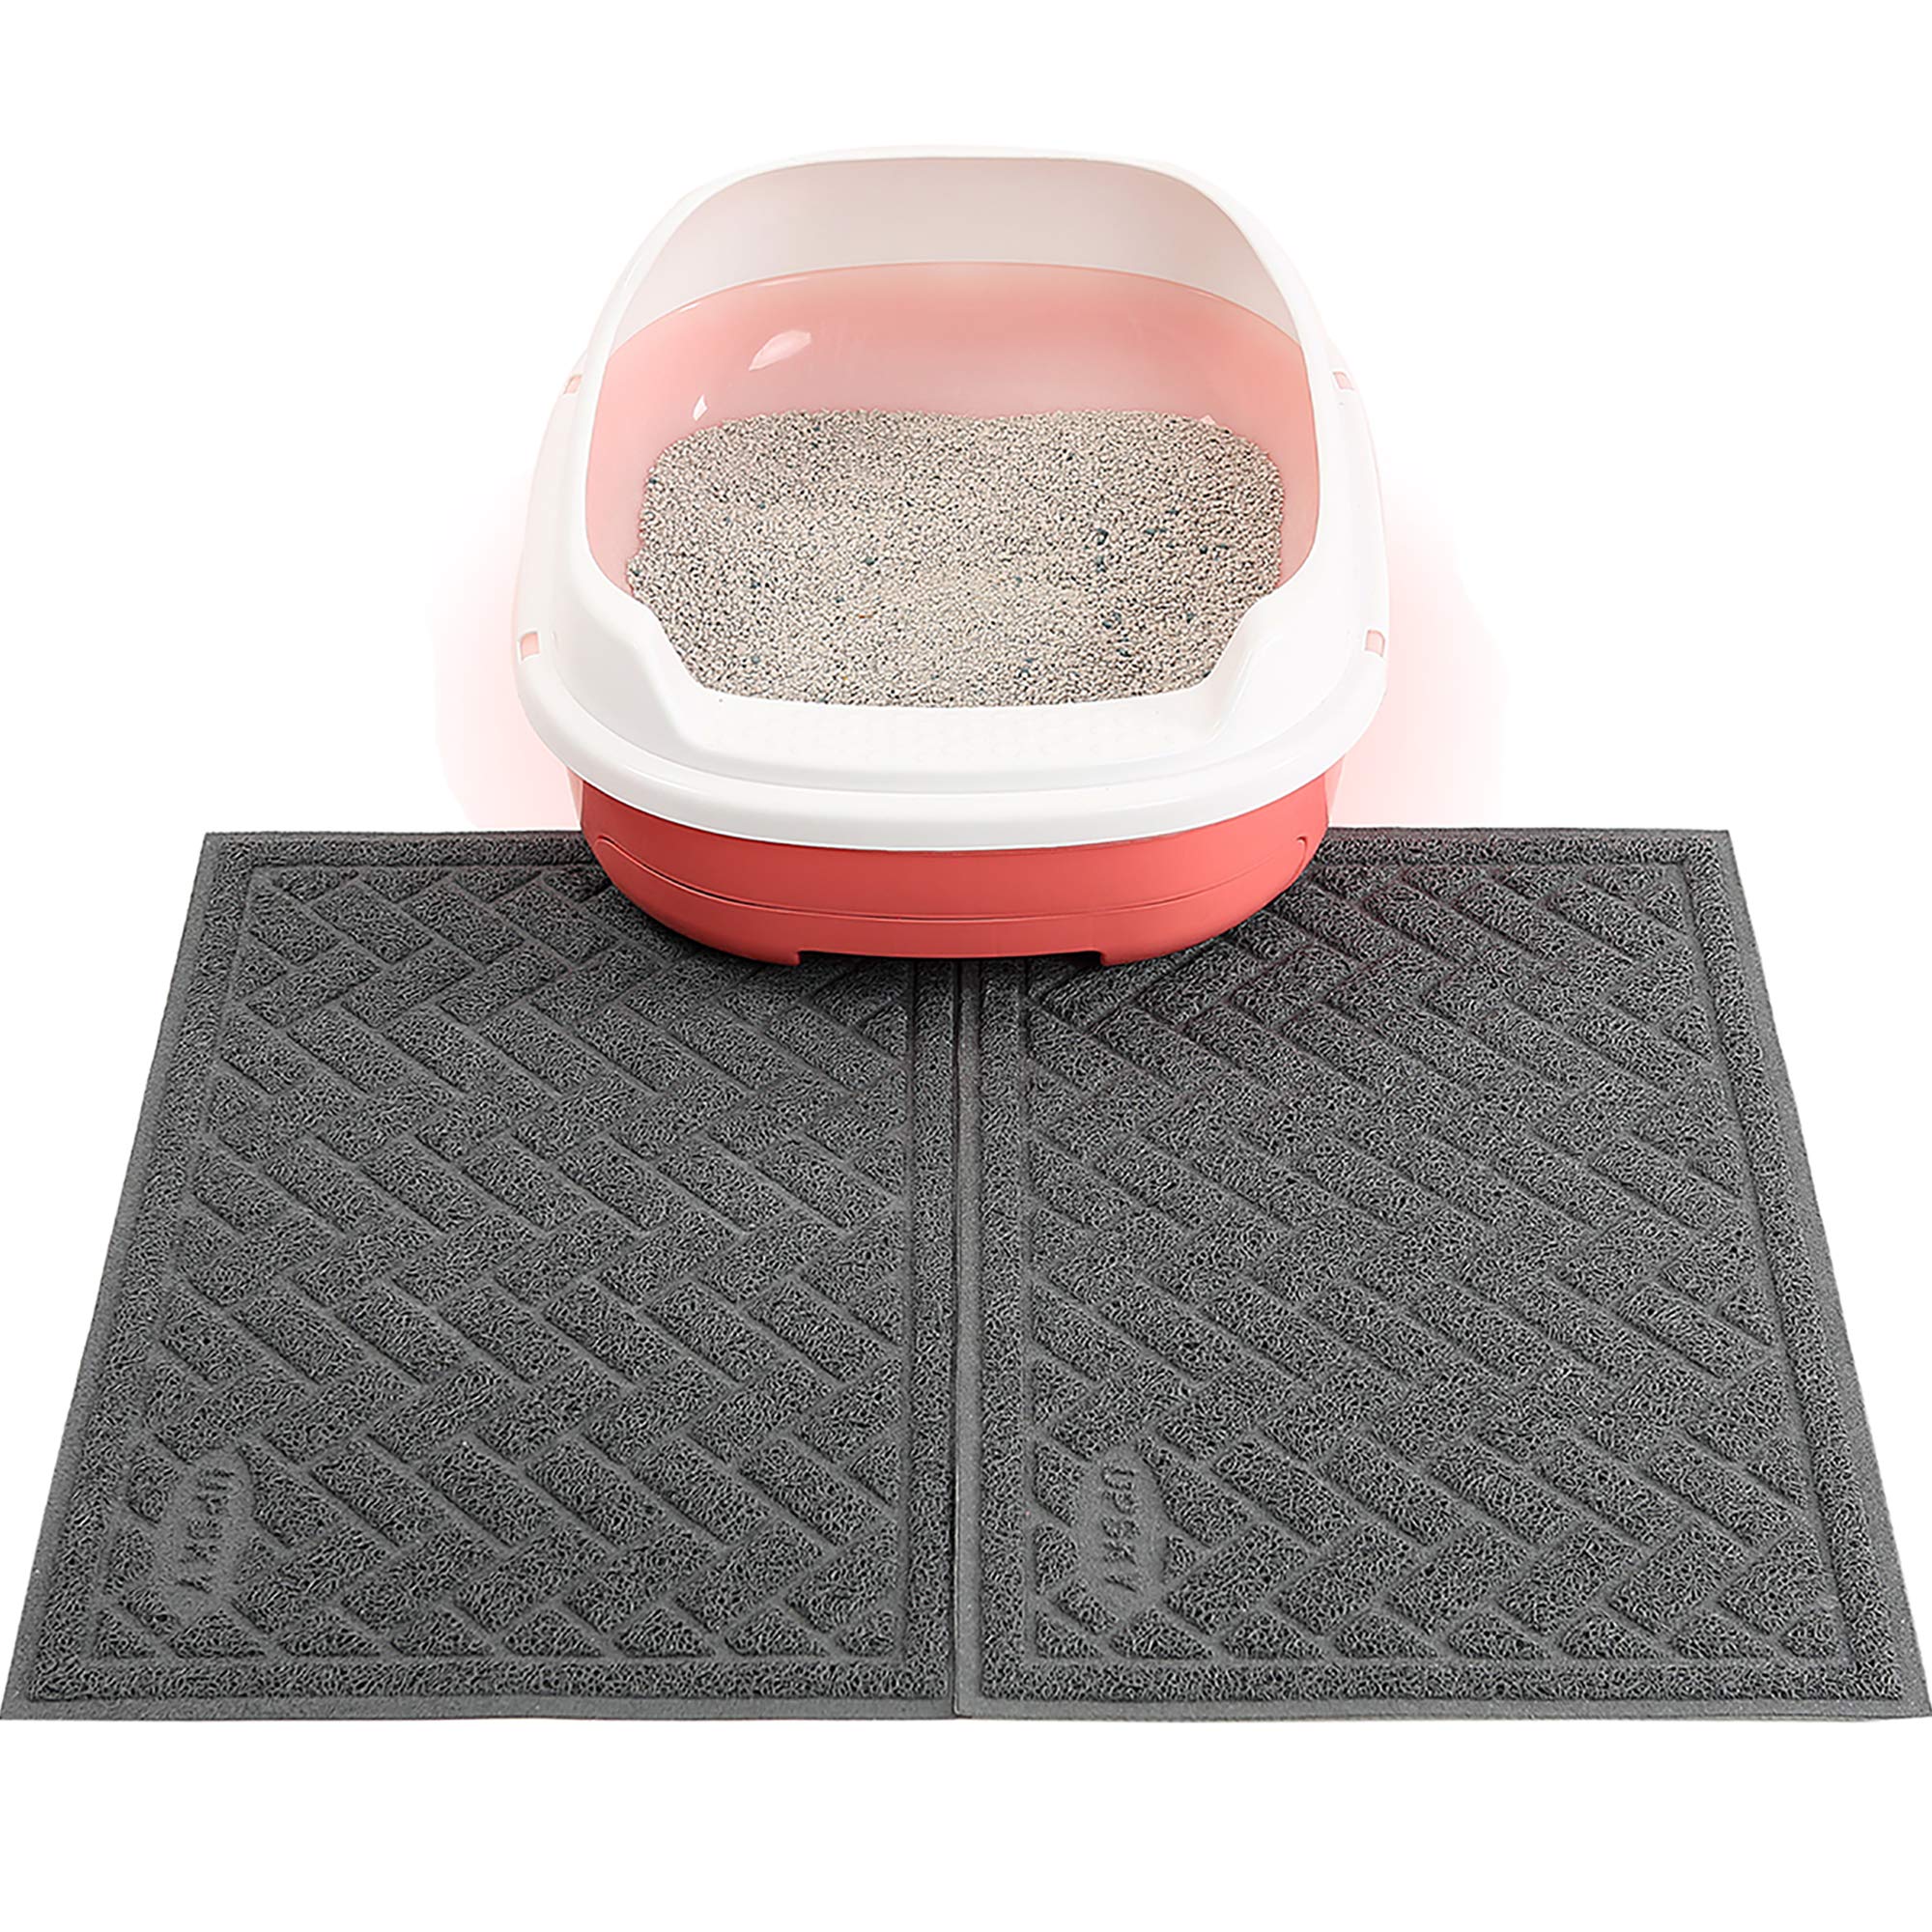 Book Cover UPSKY Cat Litter Mats 2 Set of Cat Litter Pads, Cat Litter Trap Mats Can Be Spliced and Placed At-Will, Scatter Control for Litter Box, Soft on Sensitive Kitty Paws, Easy to Clean. (24’’ x 16’’) grey